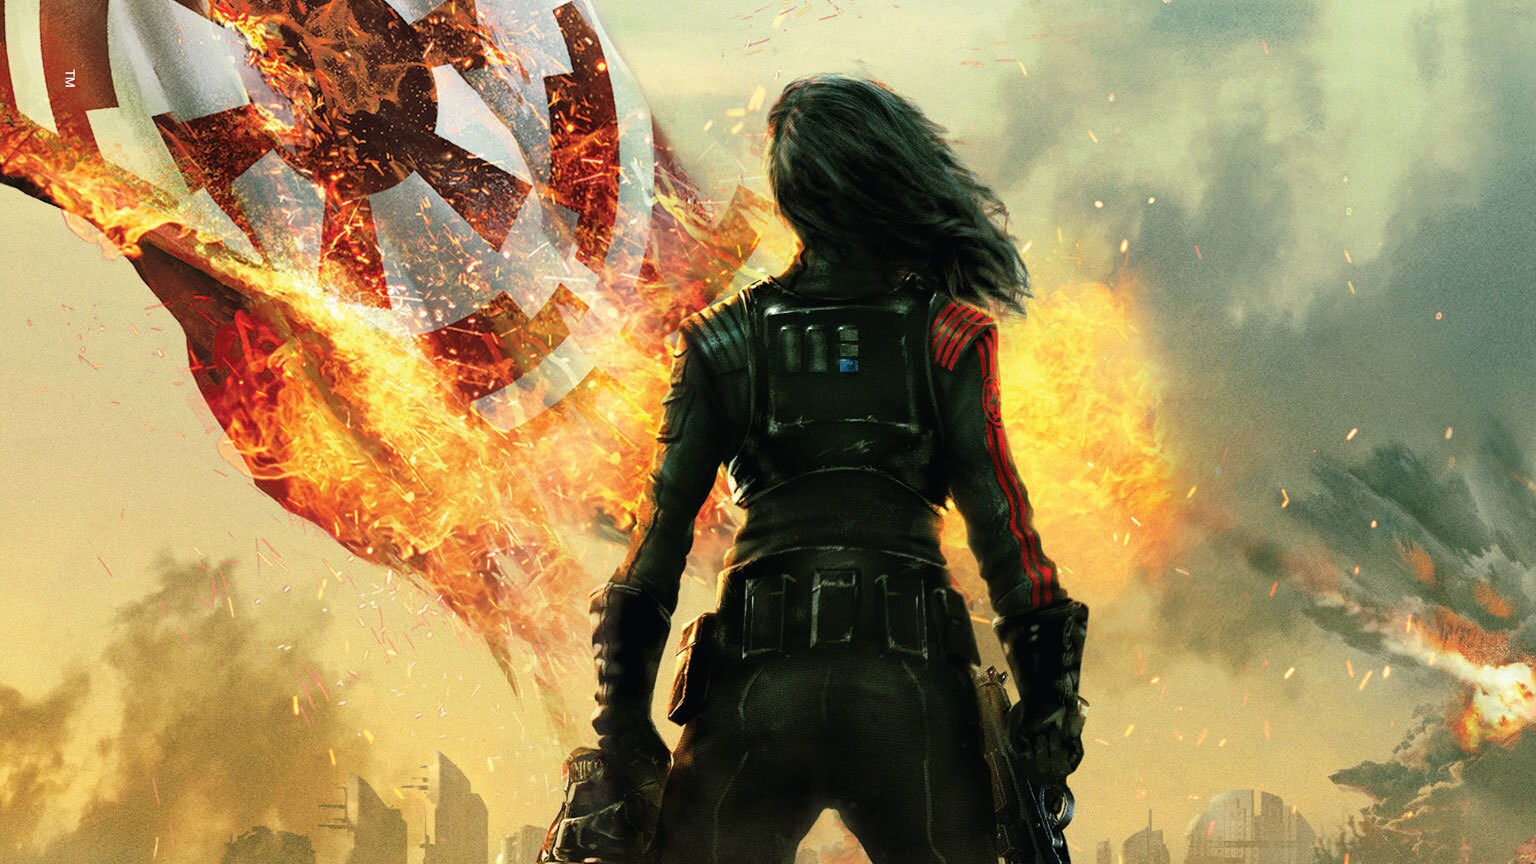 The Empire's Elite Strike Team Rises in Battlefront II: Inferno Squad - Exclusive Excerpt